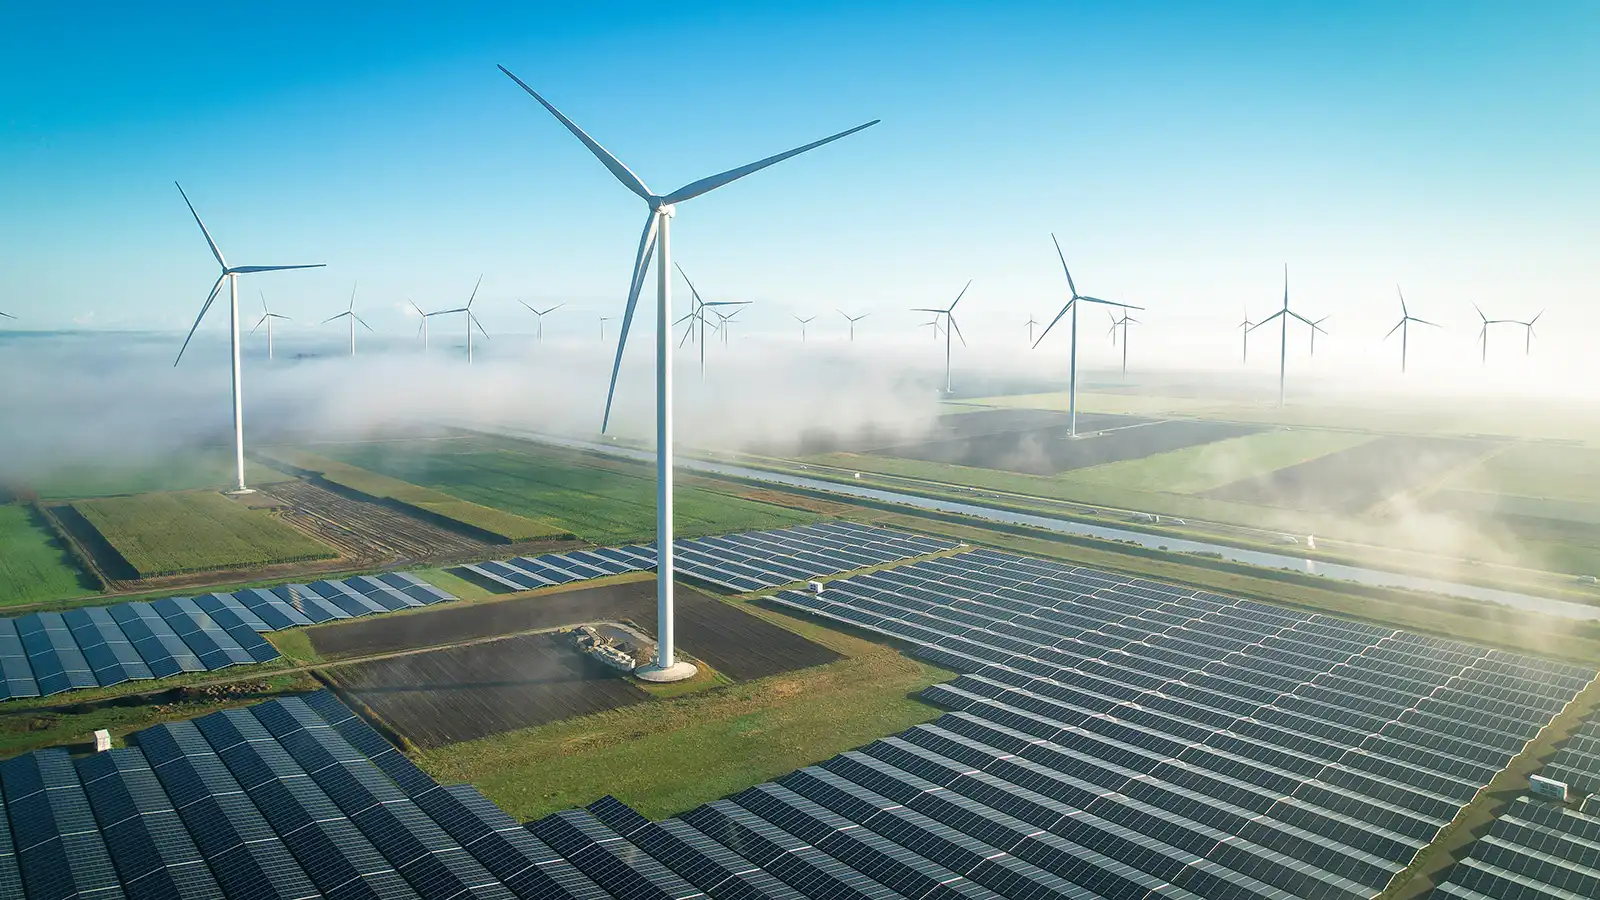 Aerial view of a solar energy field and wind turbines in foggy conditions during a Autumn morning.